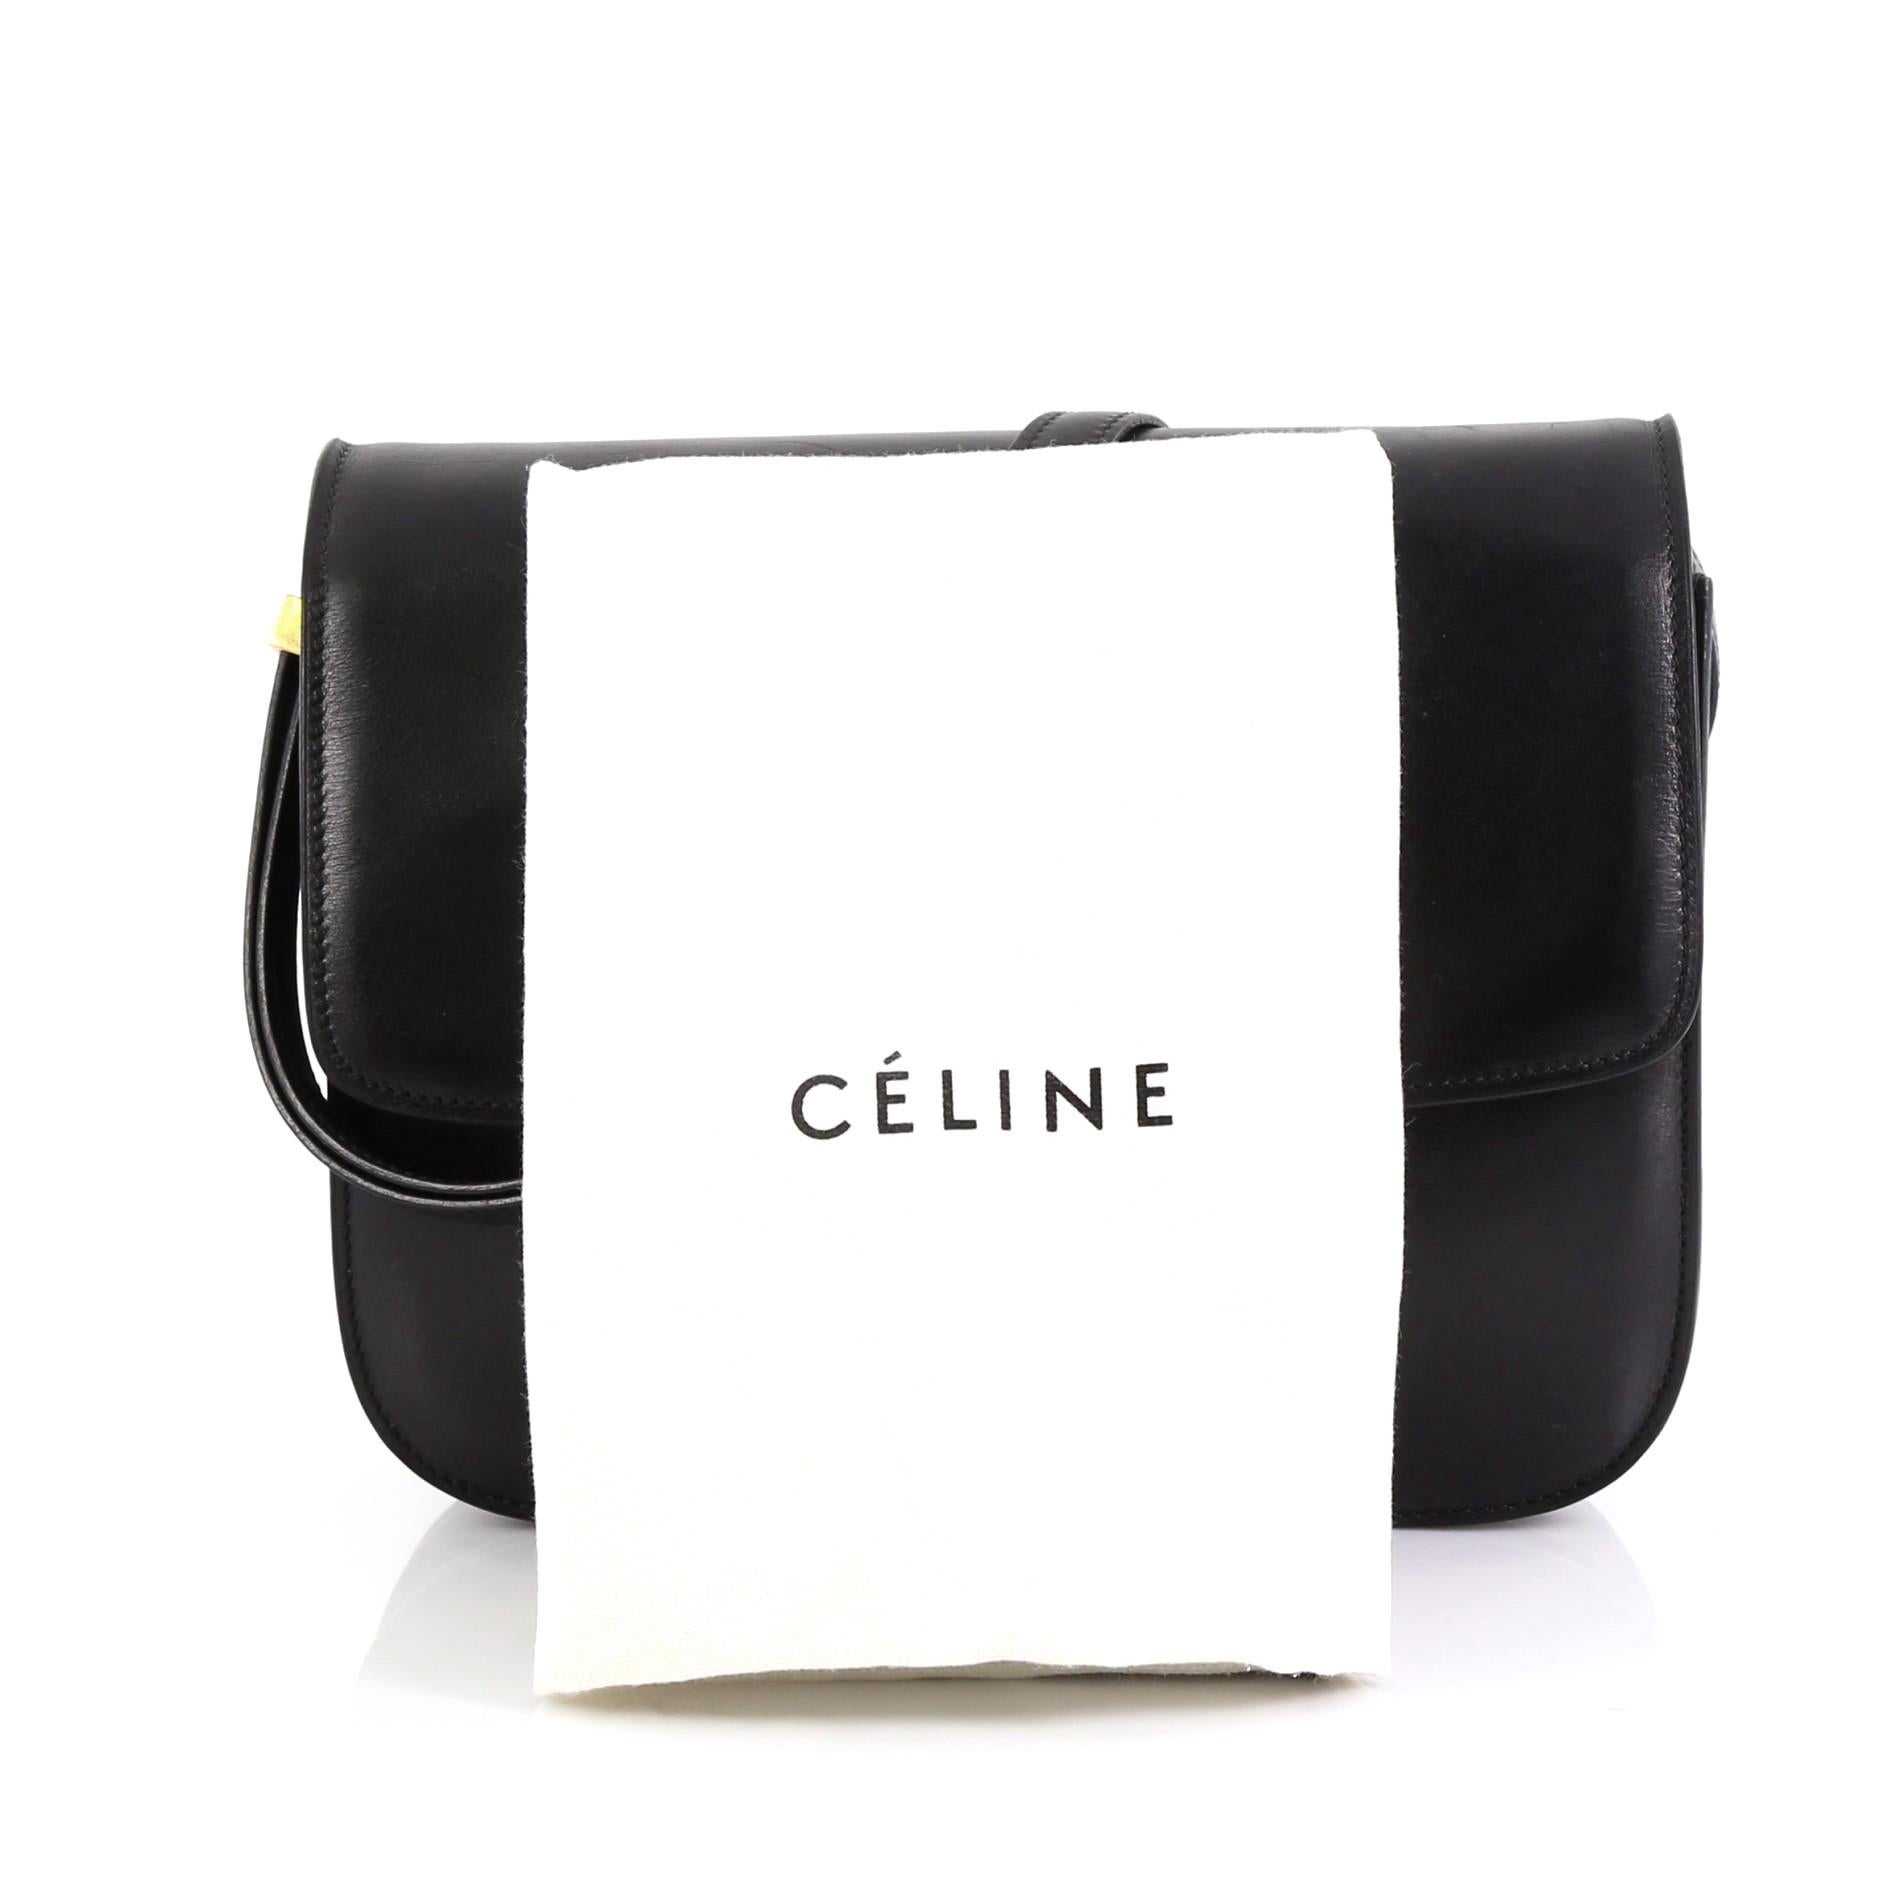 This Celine Classic Box Bag Smooth Leather Medium, crafted from black smooth leather, features a long adjustable strap and gold-tone hardware. Its push-tab closure opens to a black leather interior with two open compartments, zip compartment and